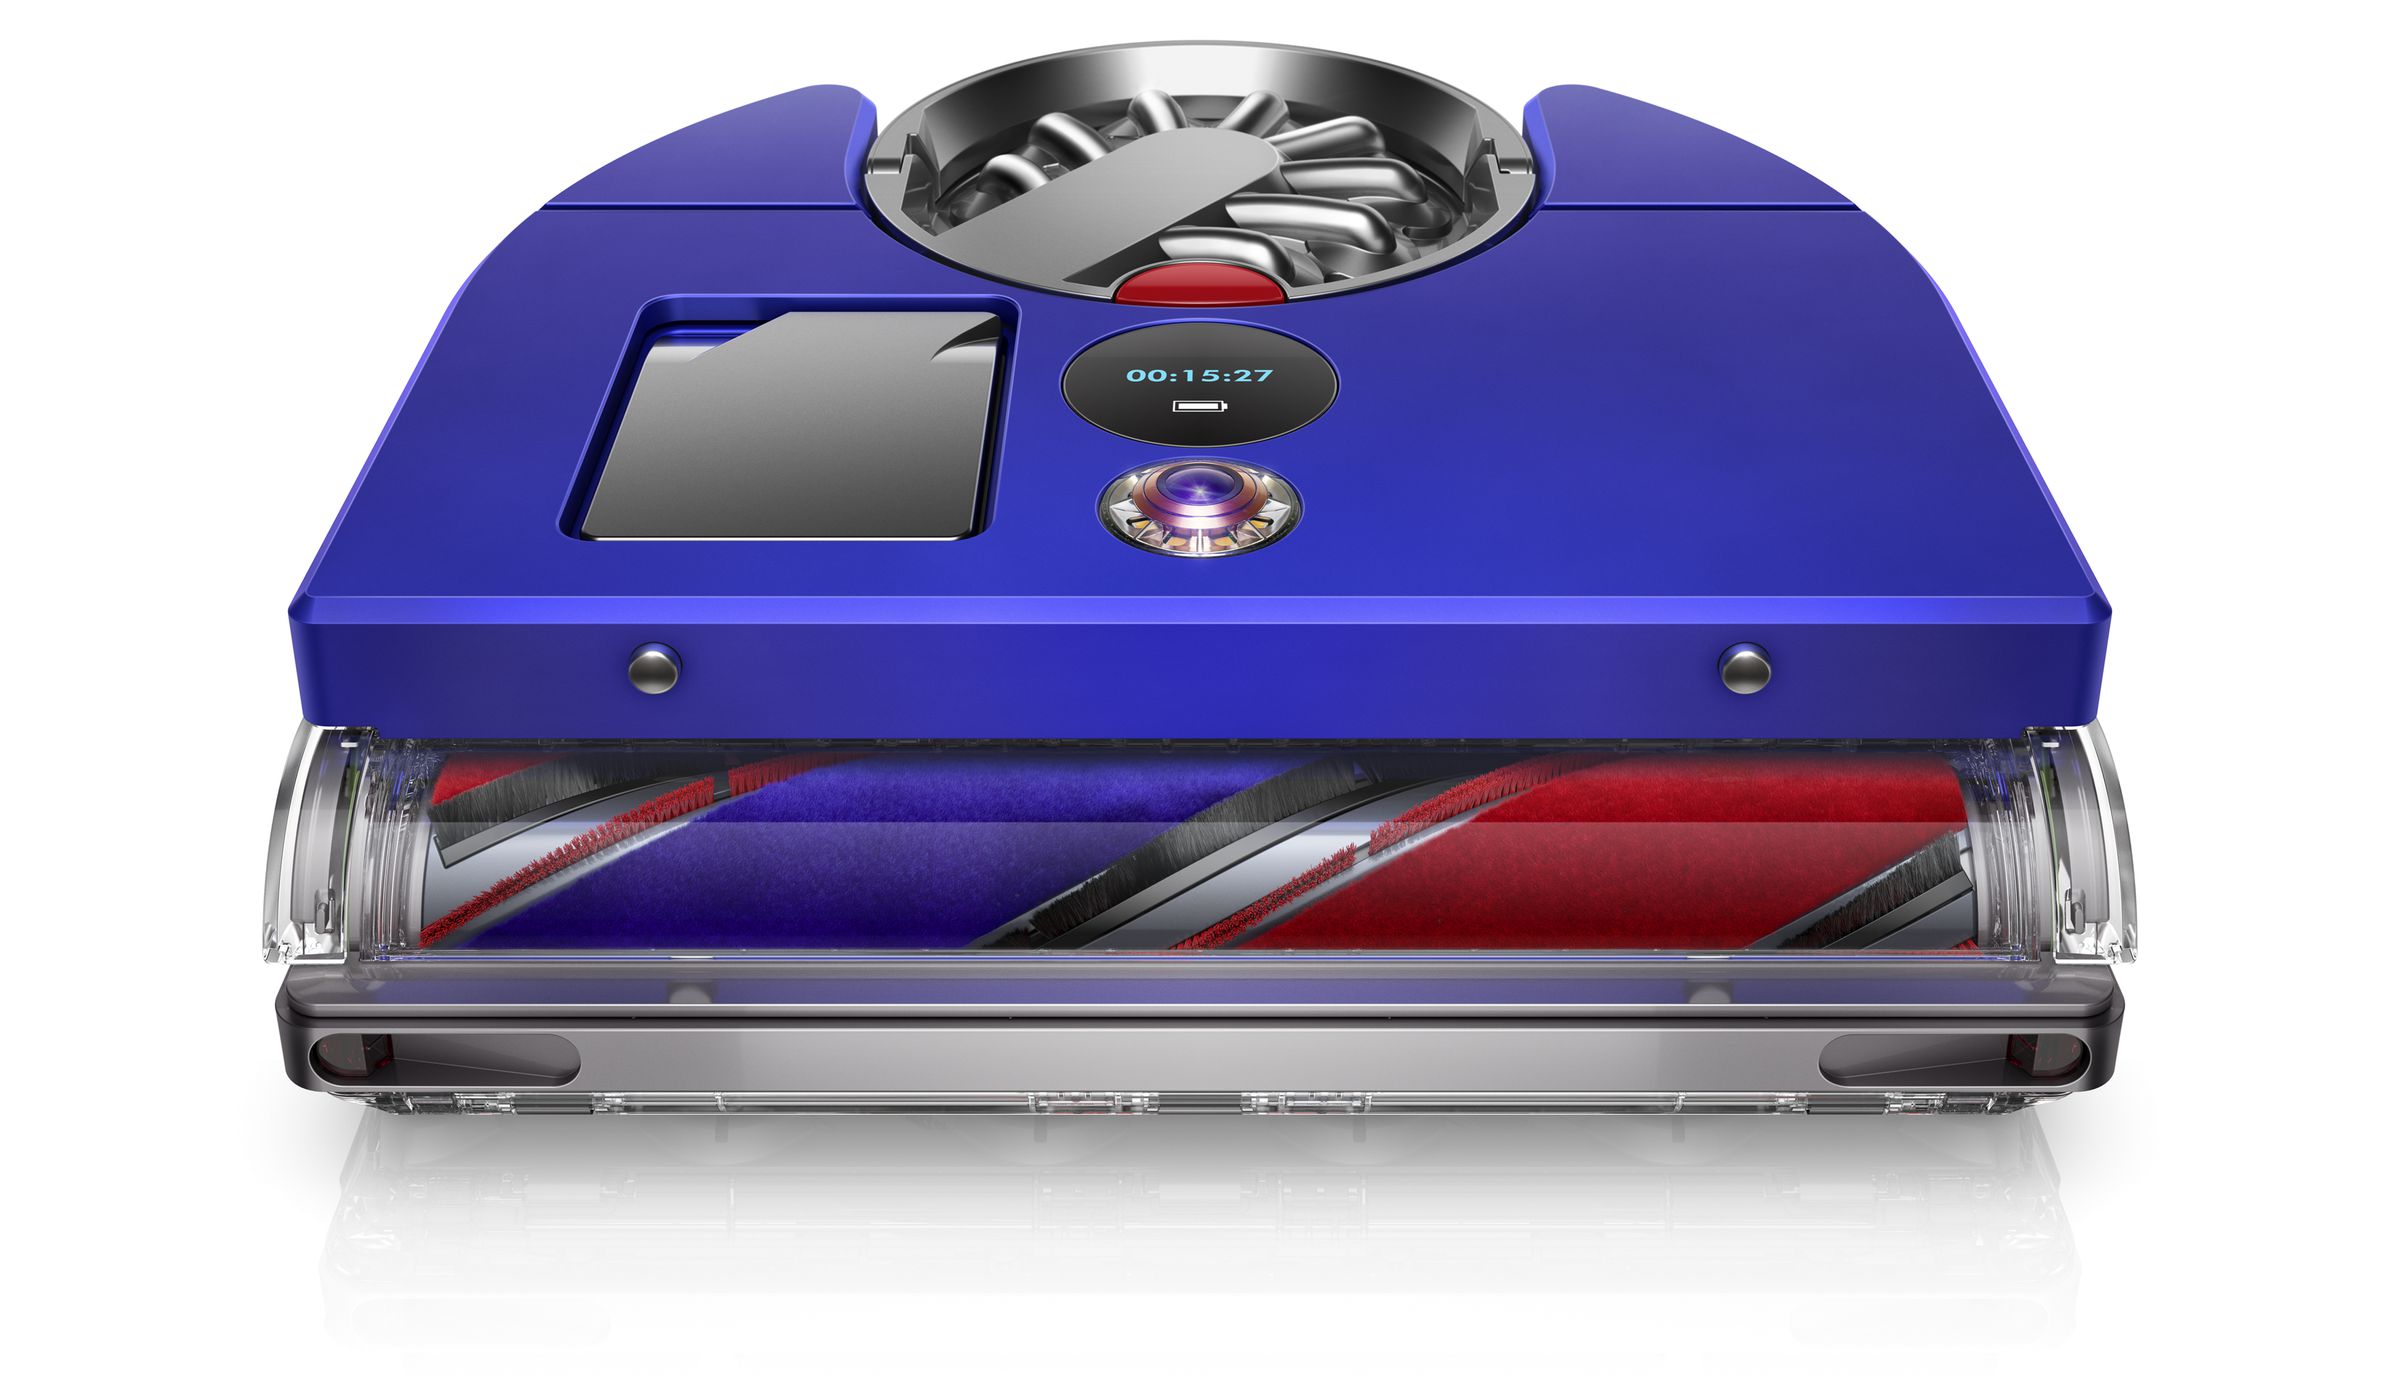 The new Dyson robot vacuum is still blue.